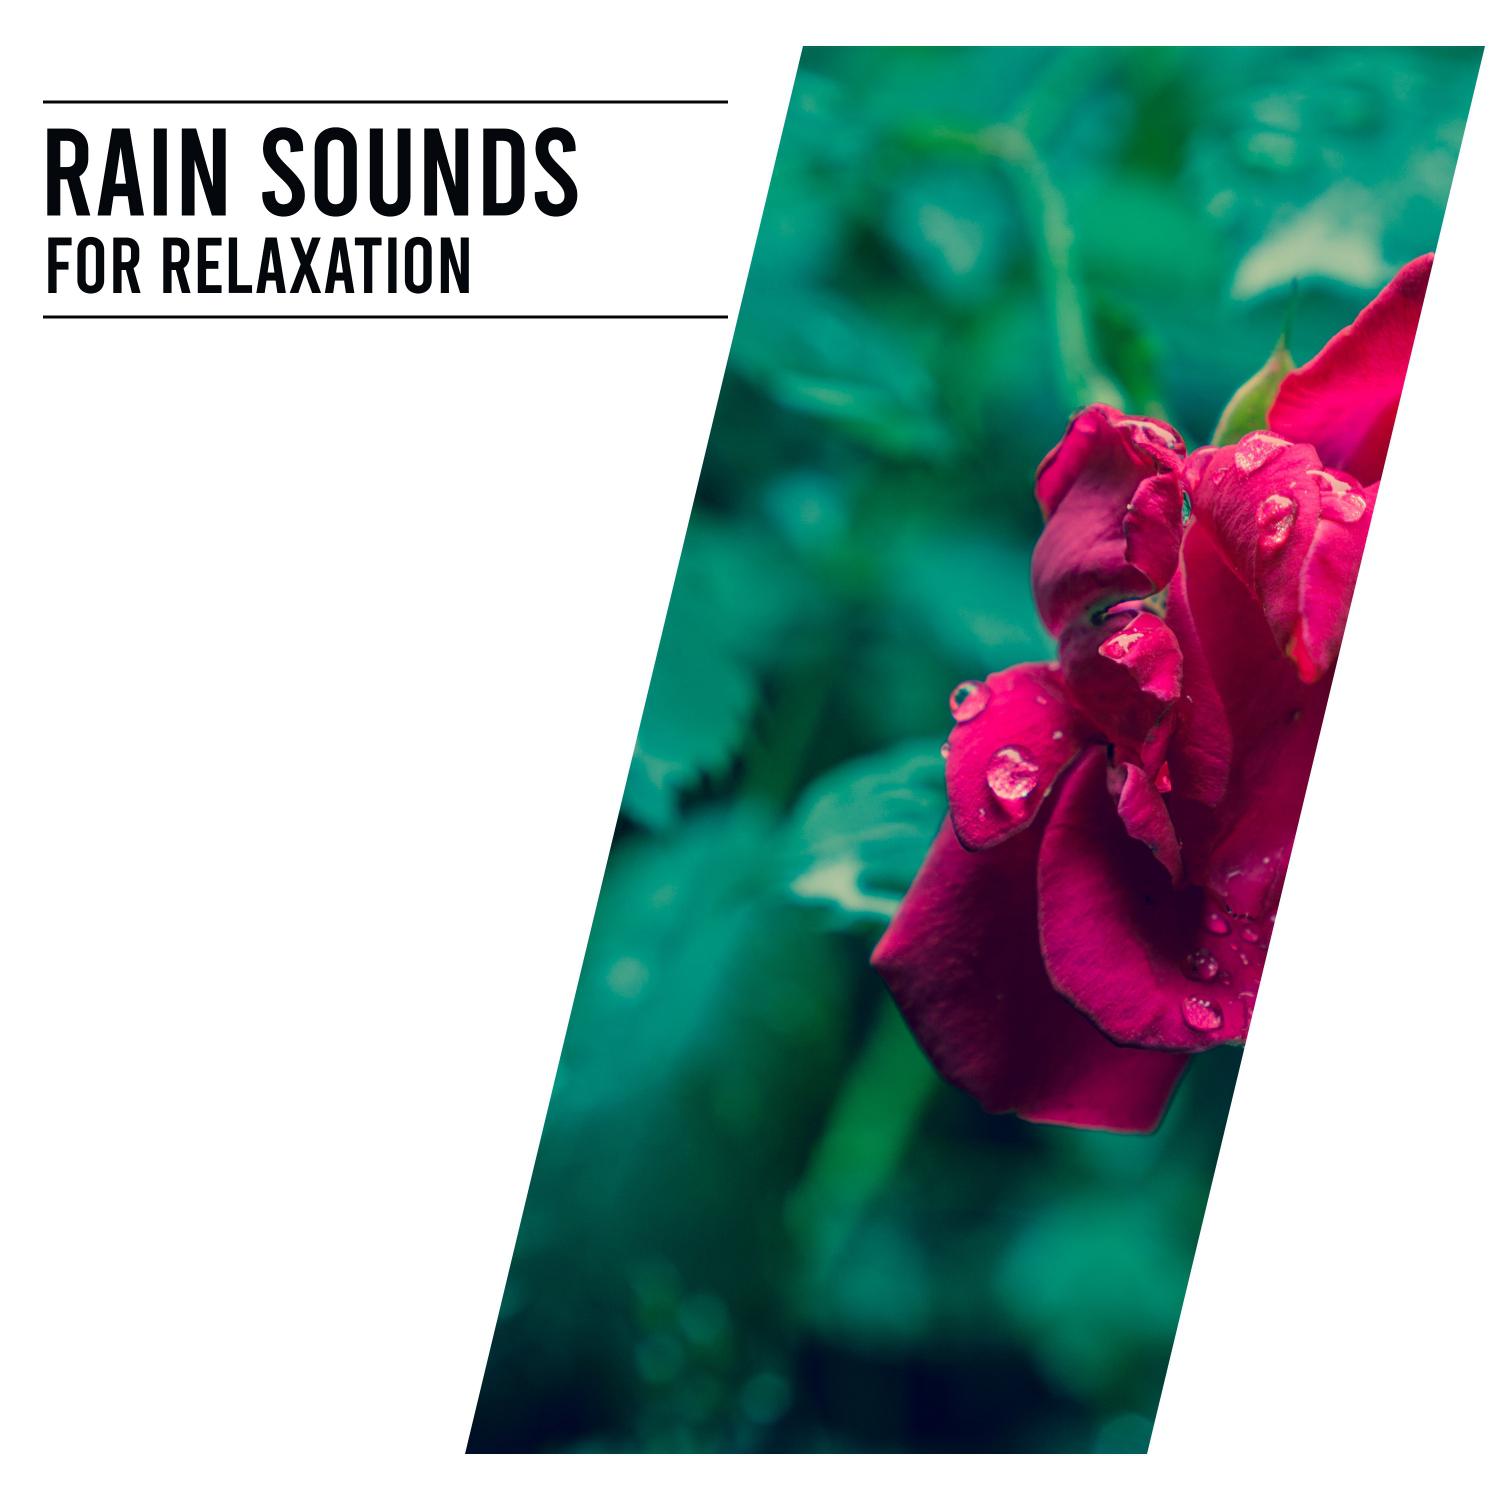 15 Peaceful Sounds of Nature - Rain Sounds for Relaxation